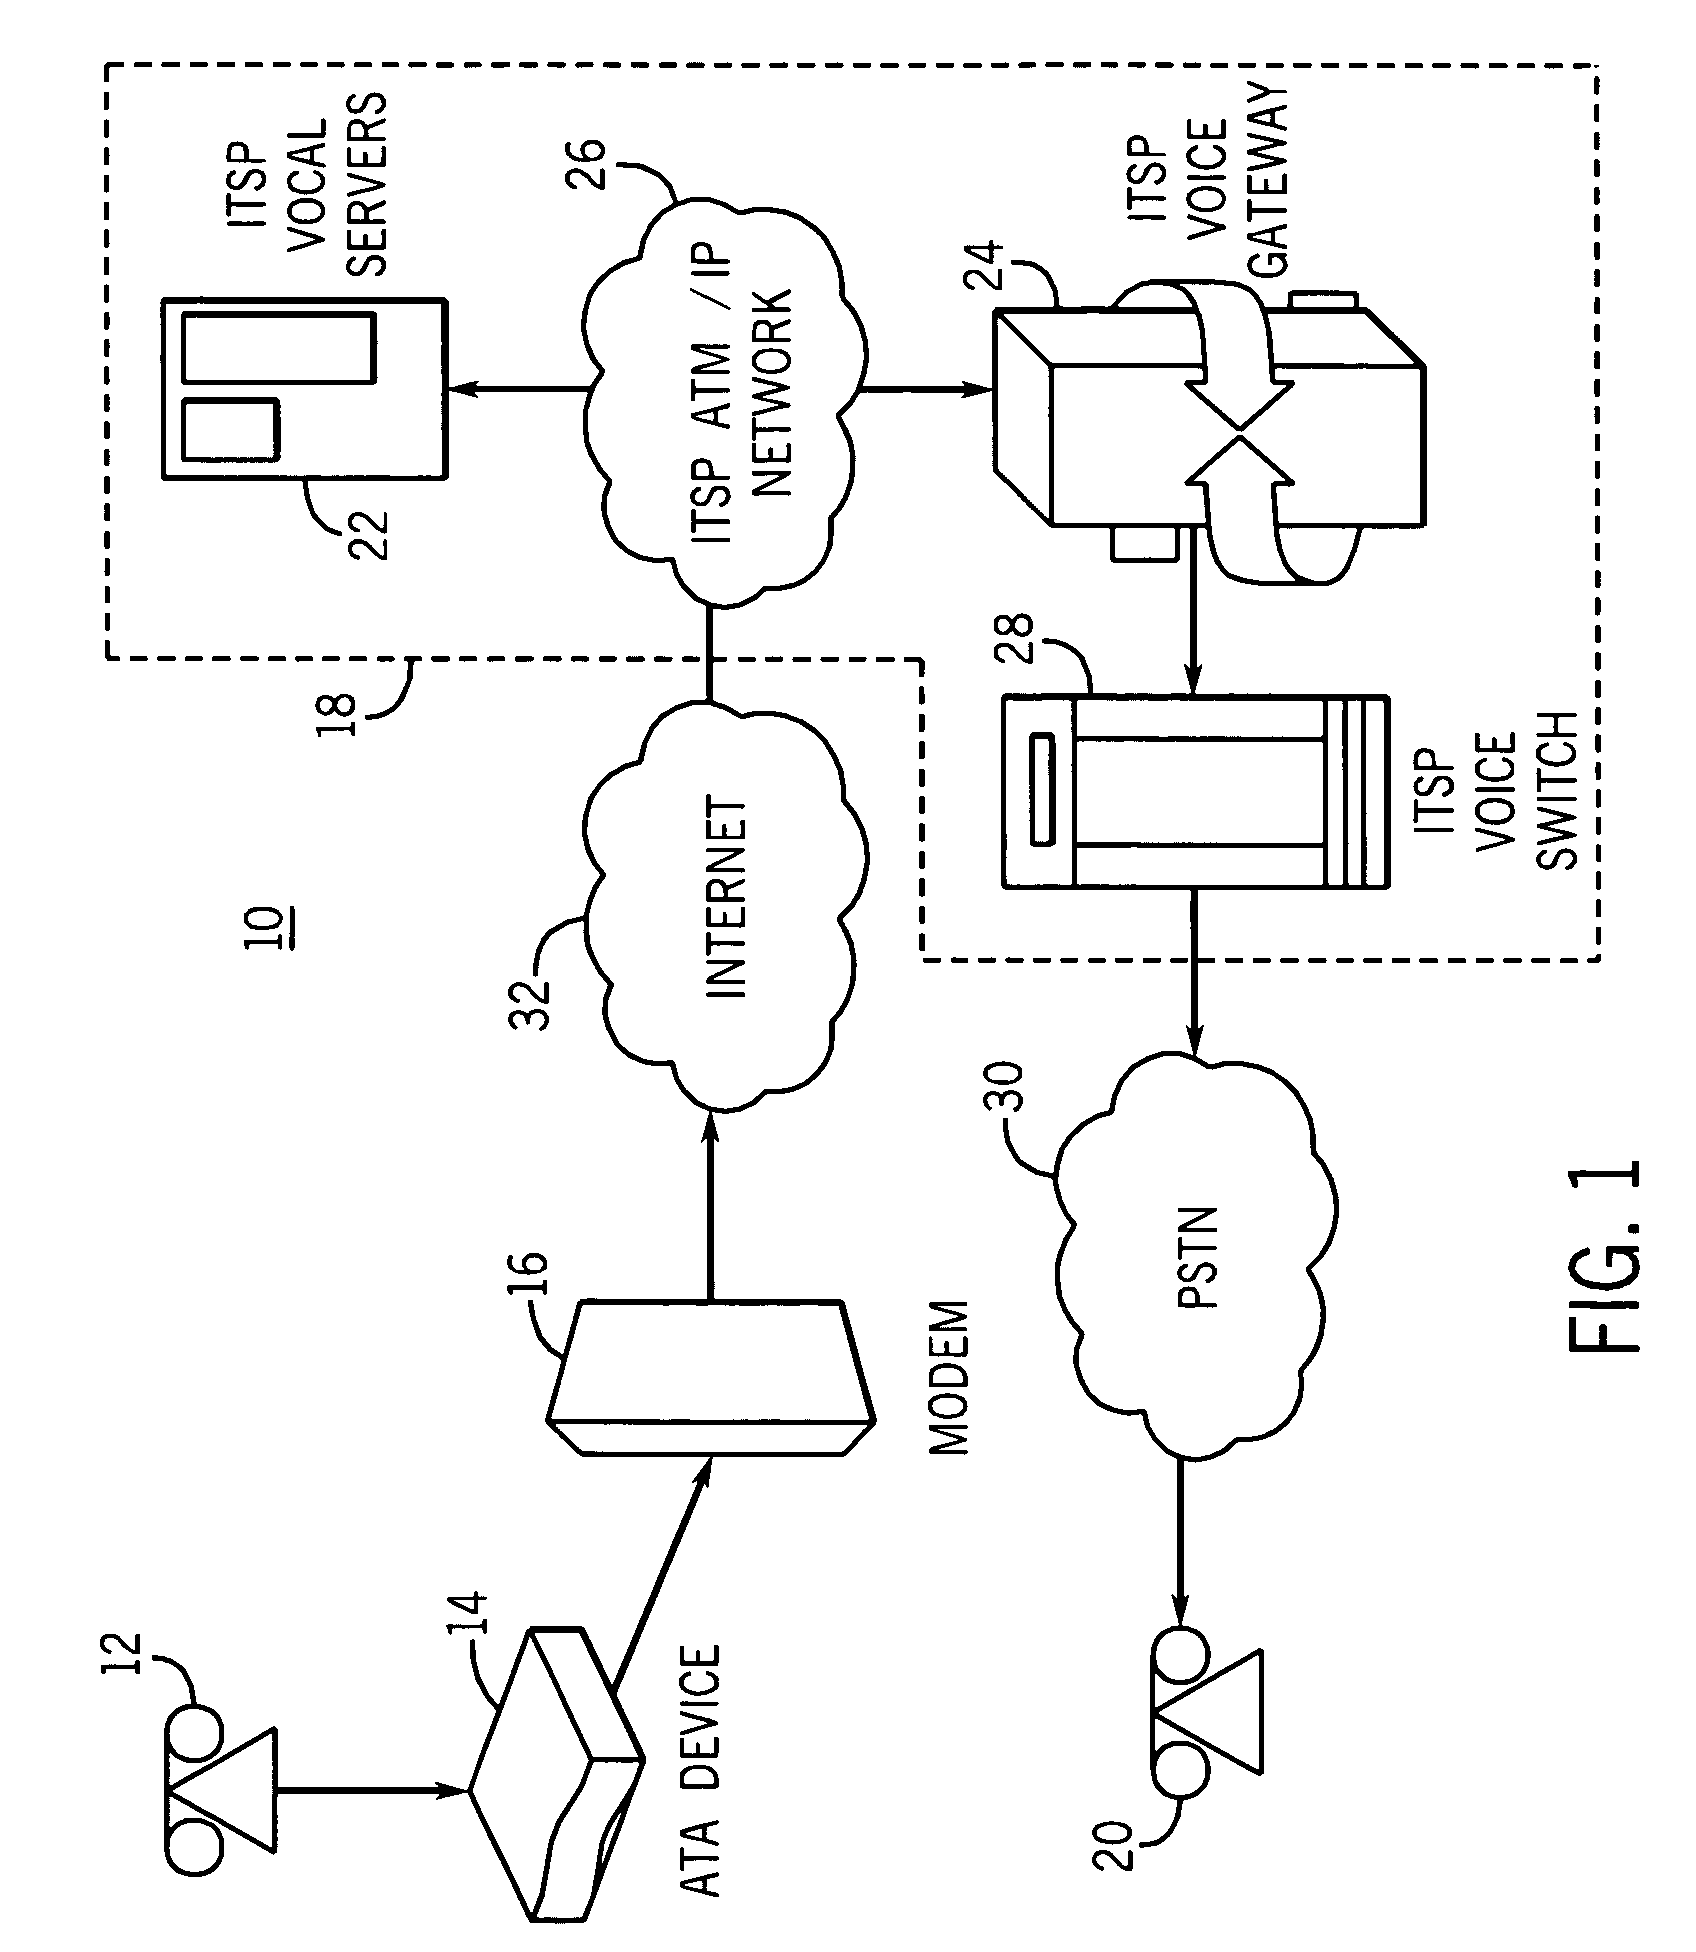 Method and system for providing voice over internet protocol telephony products